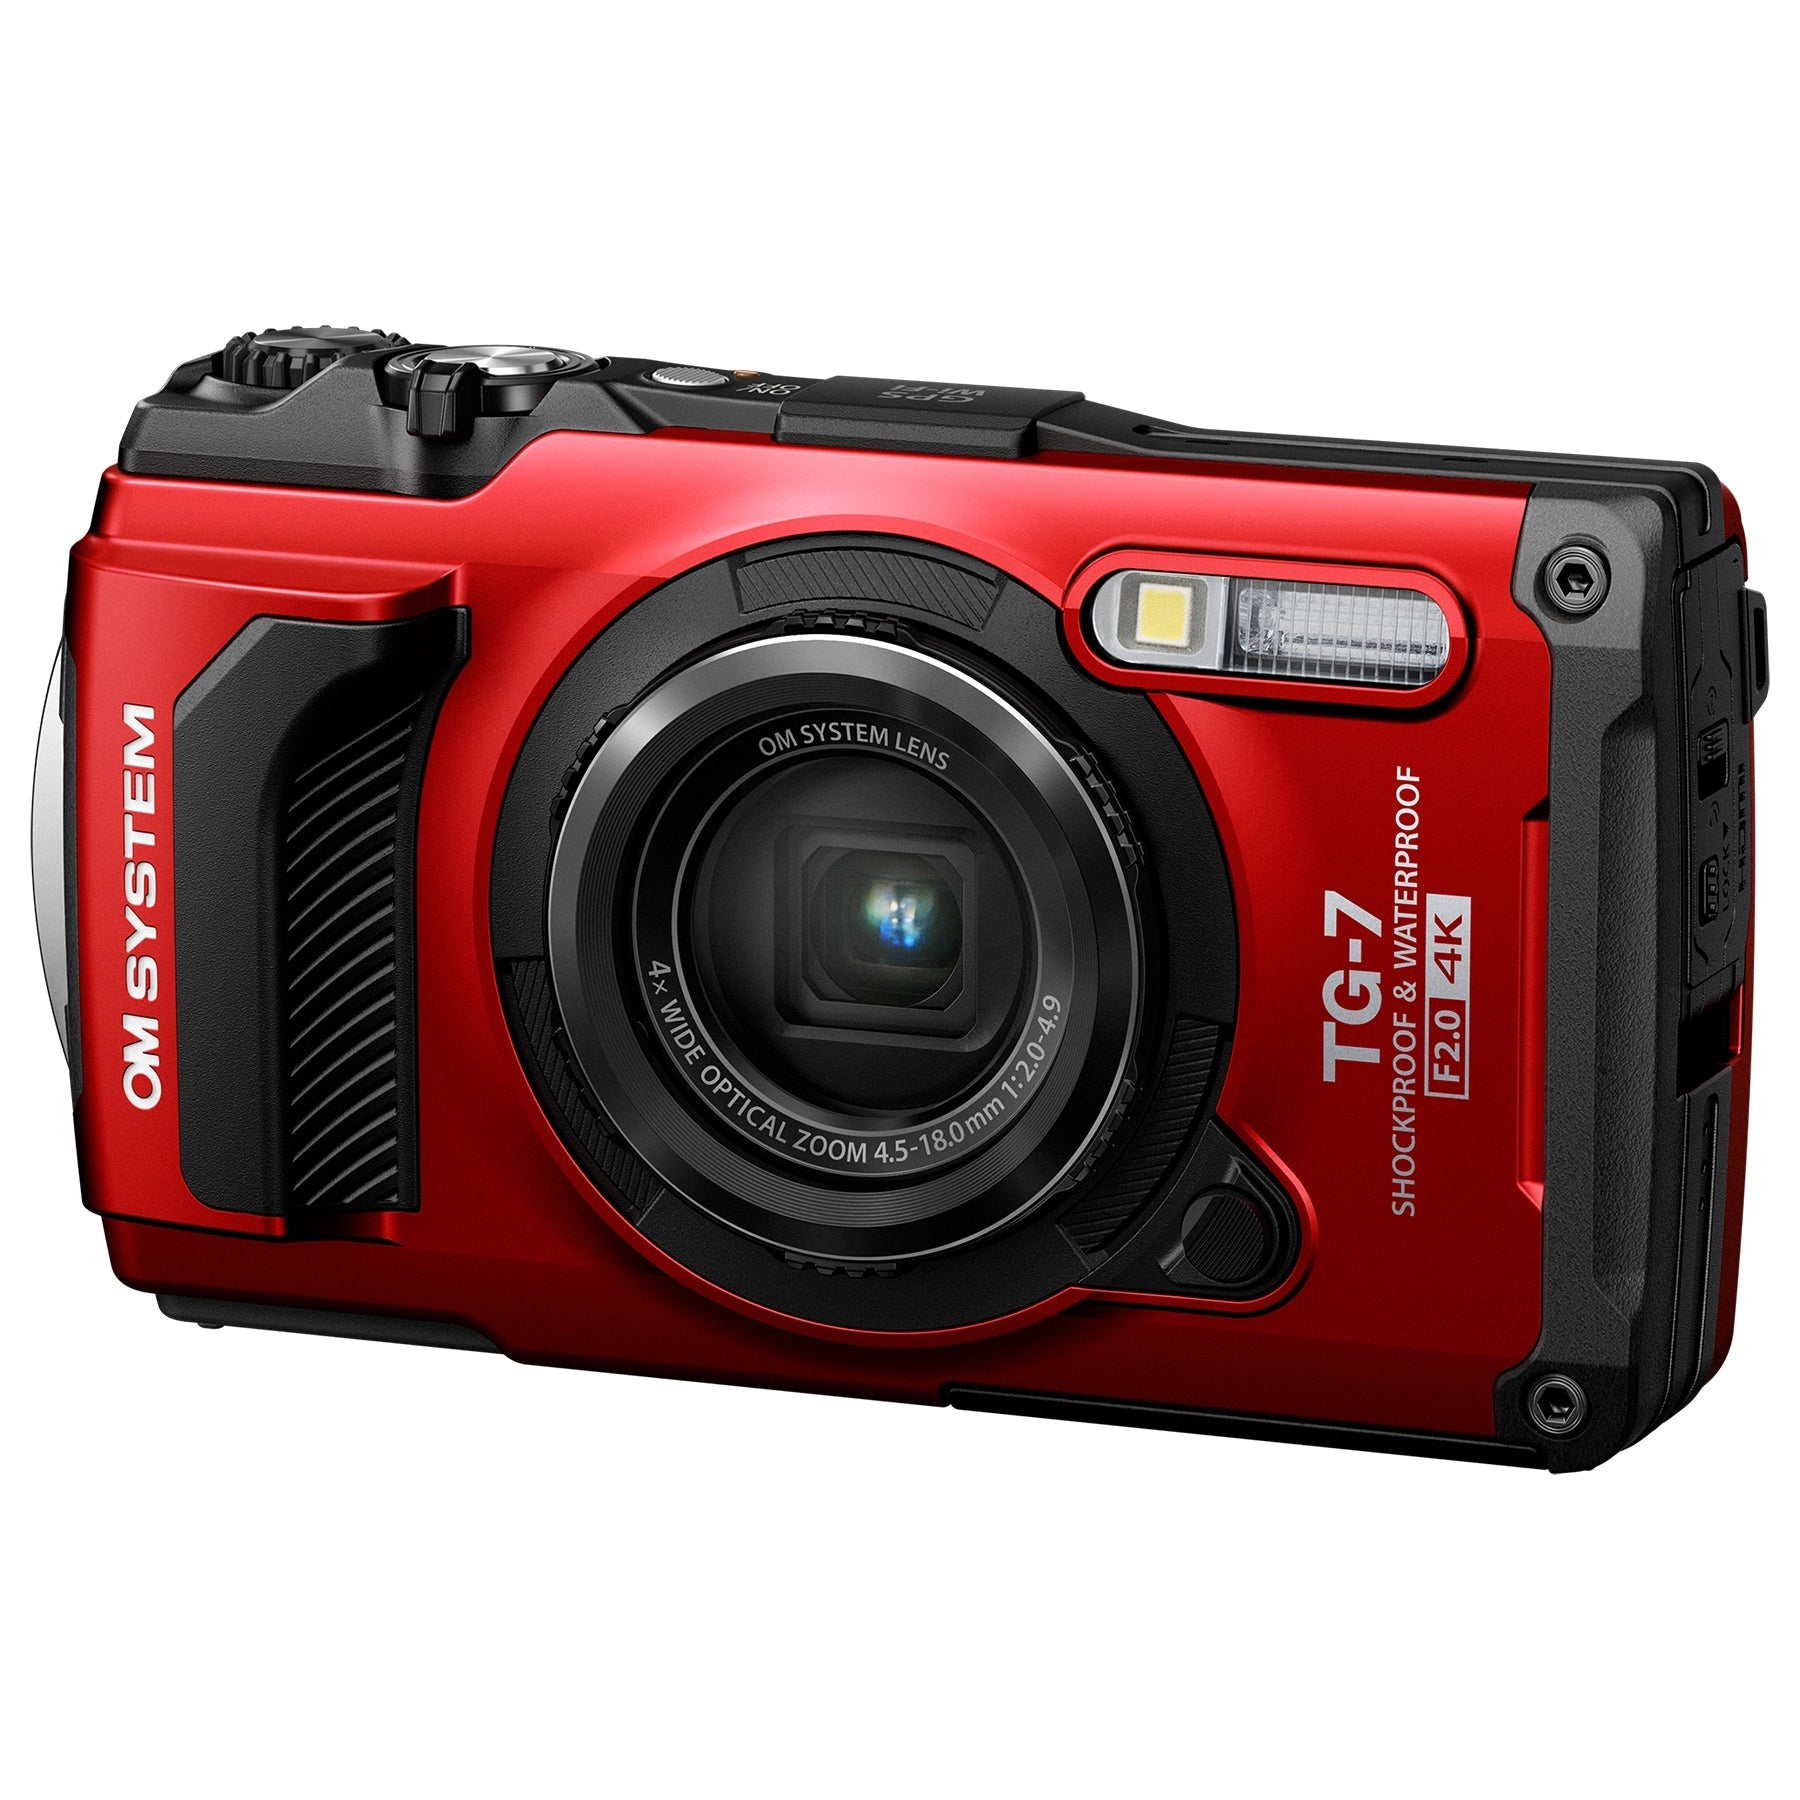 OM System TG-7 12MP 4x Zoom Tough Compact Camera (Red)